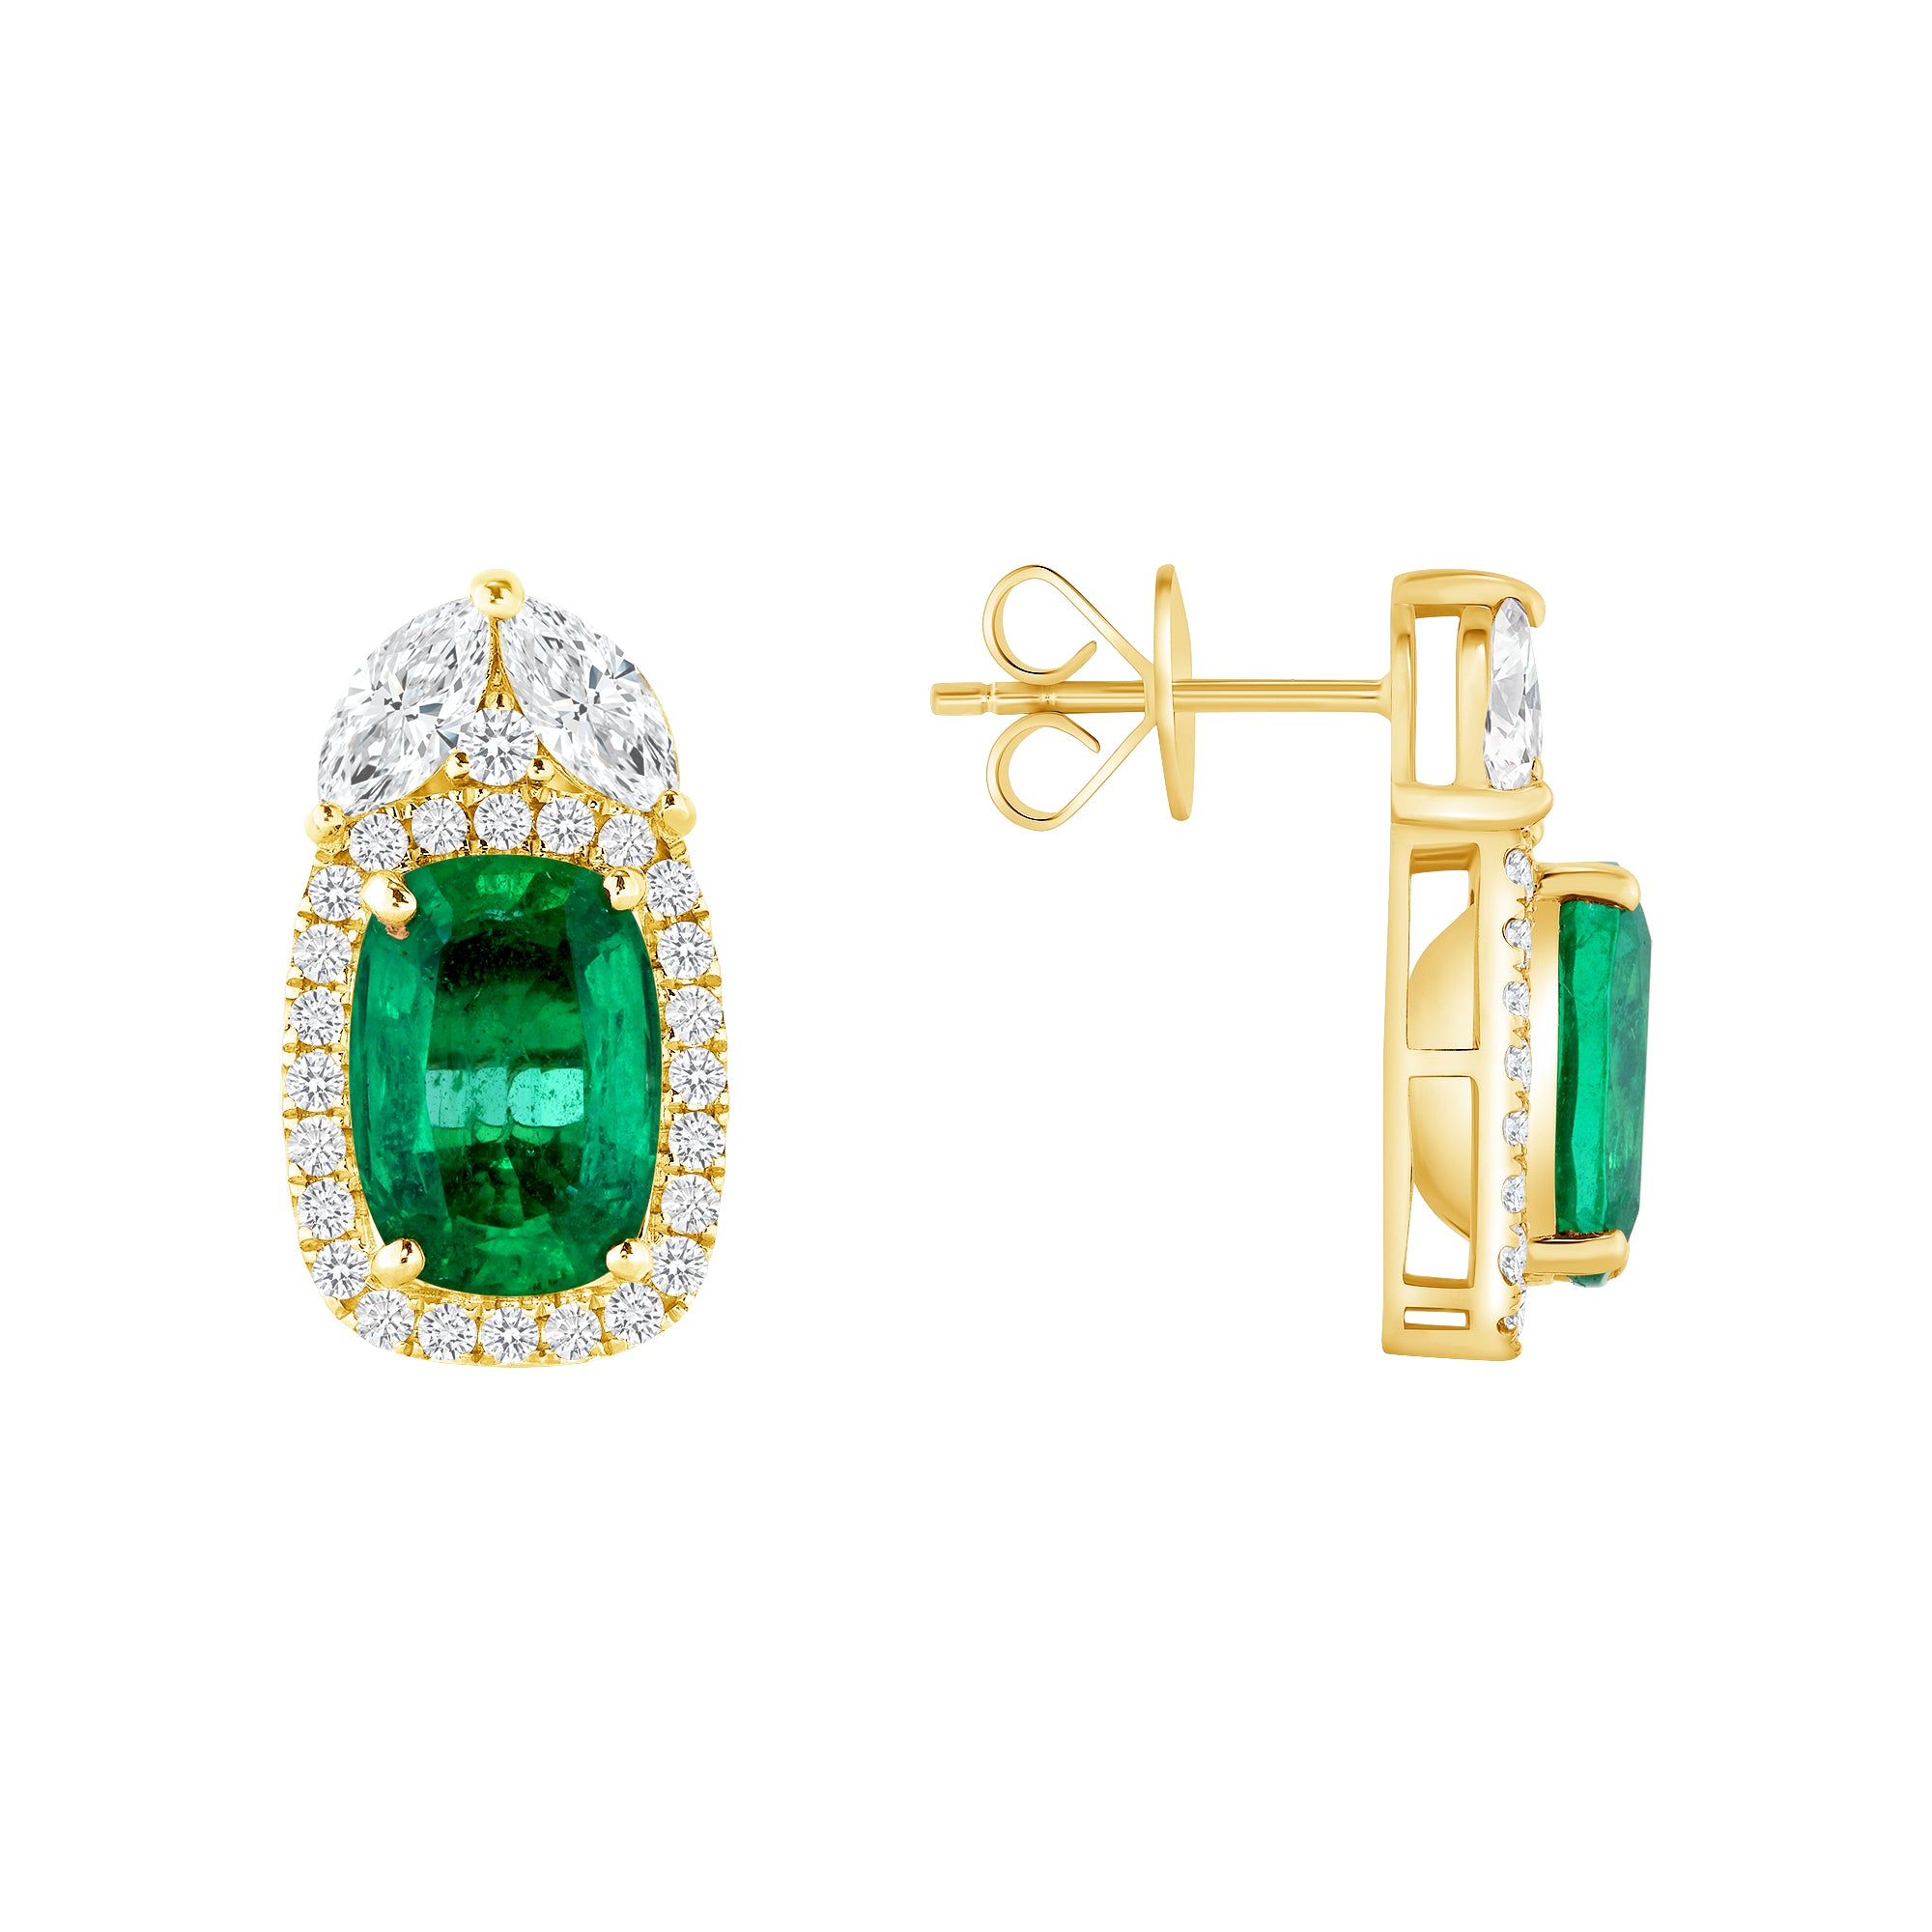 4.18 ct Emerald-Cut Emerald on a Halo Design with 1.44 ct Round & Marquise cut Diamond in 14k Yellow Gold Stud Earrings